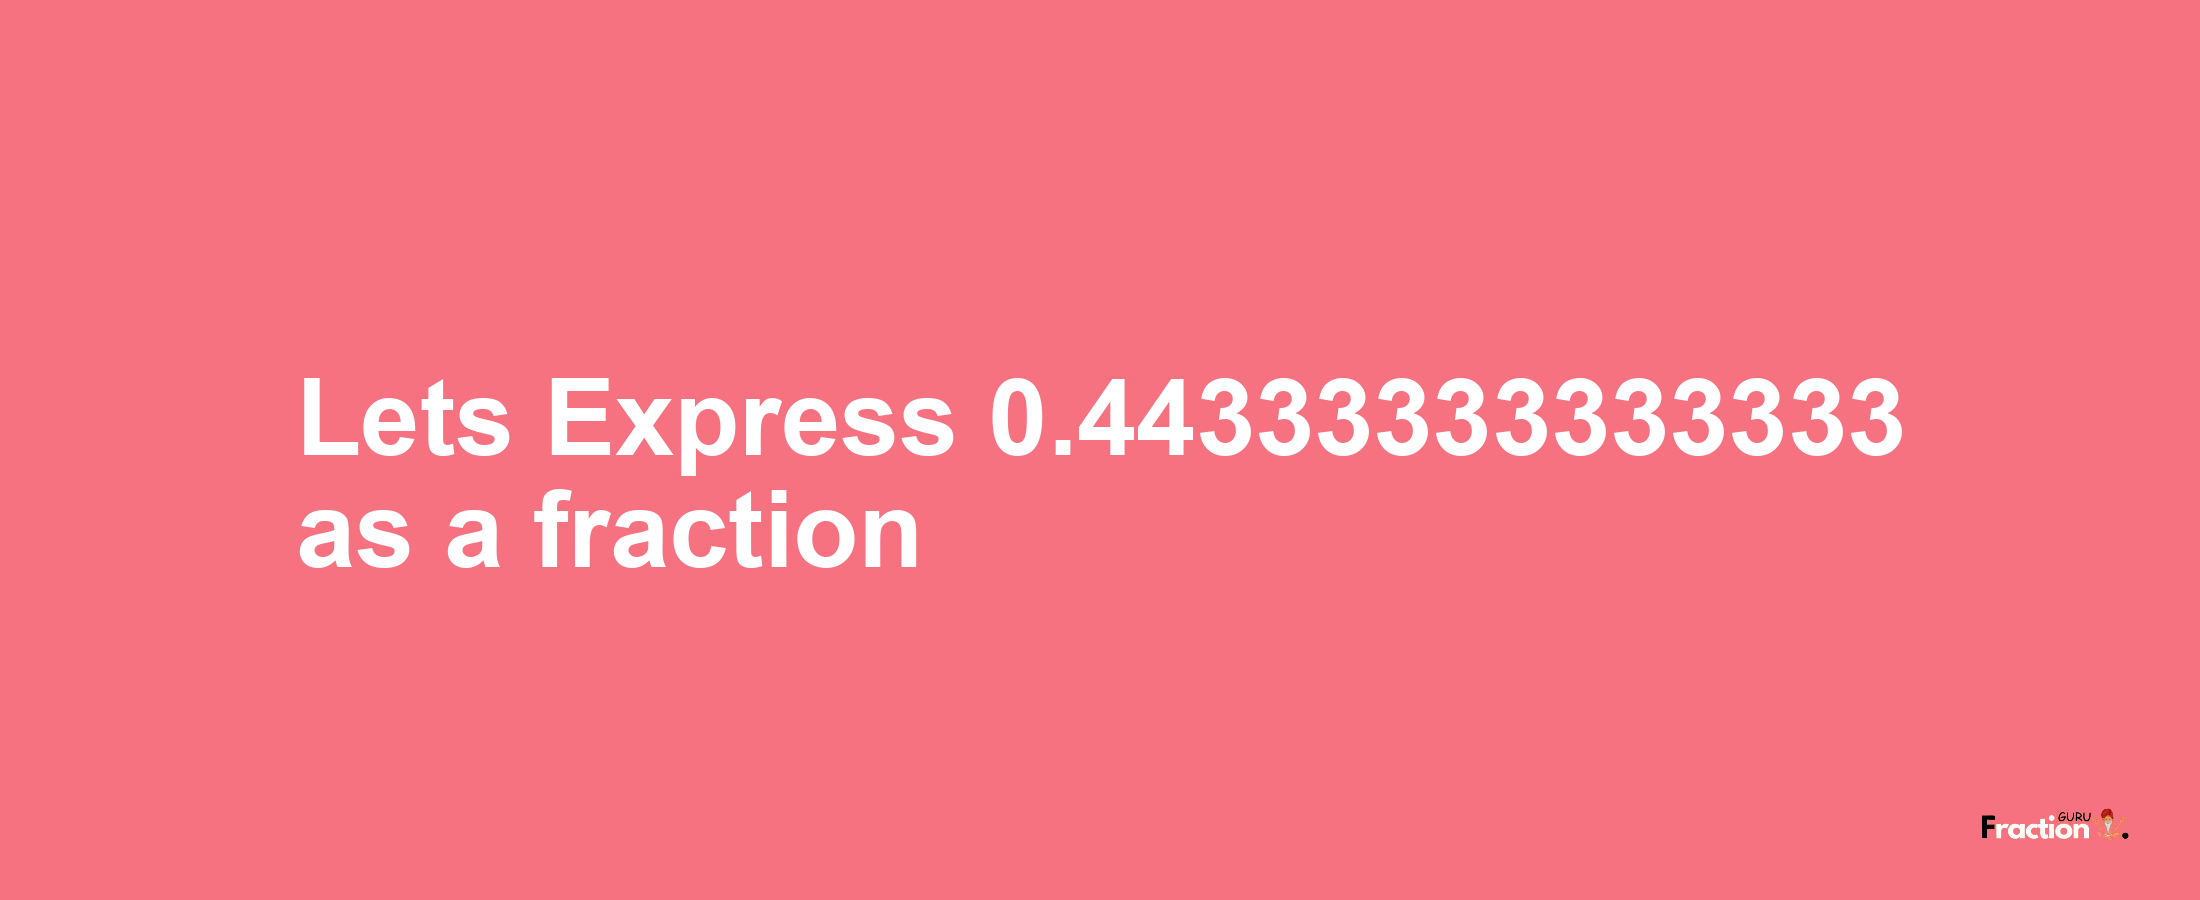 Lets Express 0.44333333333333 as afraction